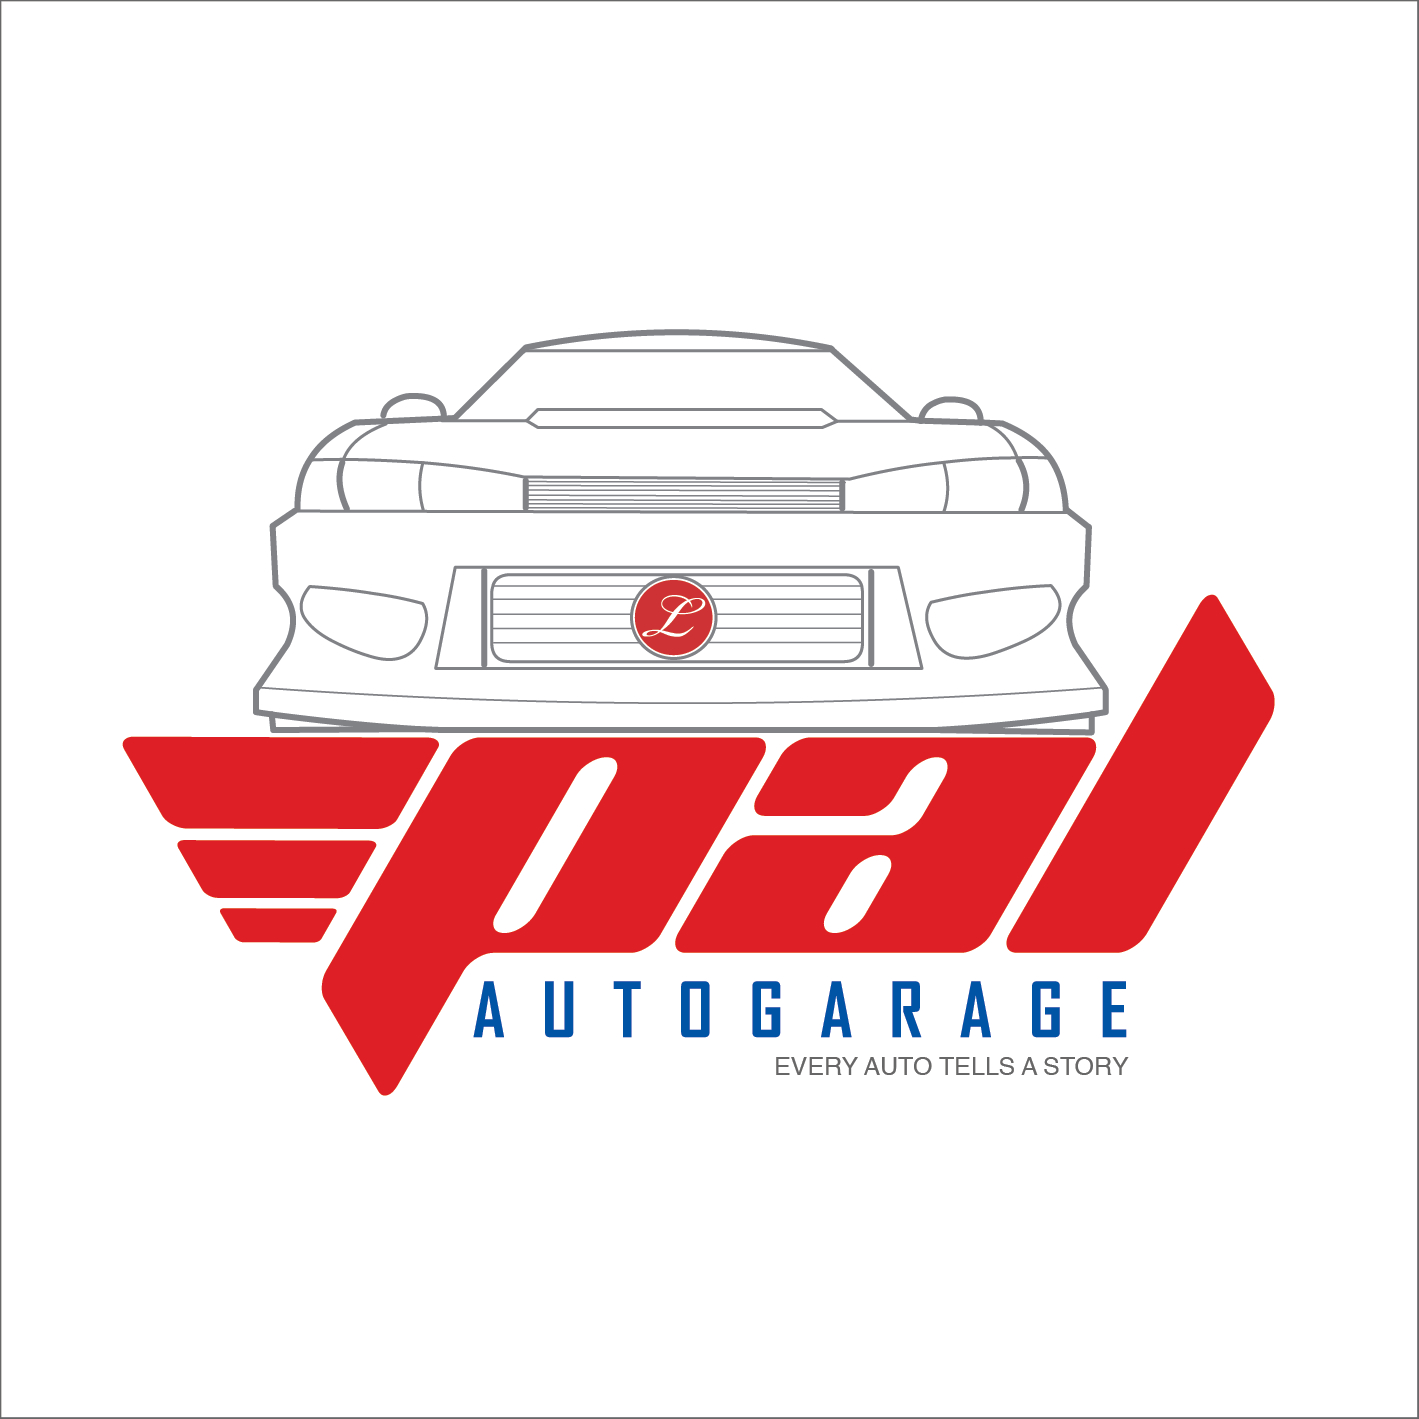 Pal Auto Garage Every Auto Tells A Story Best Car Service for dimensions 1419 X 1419